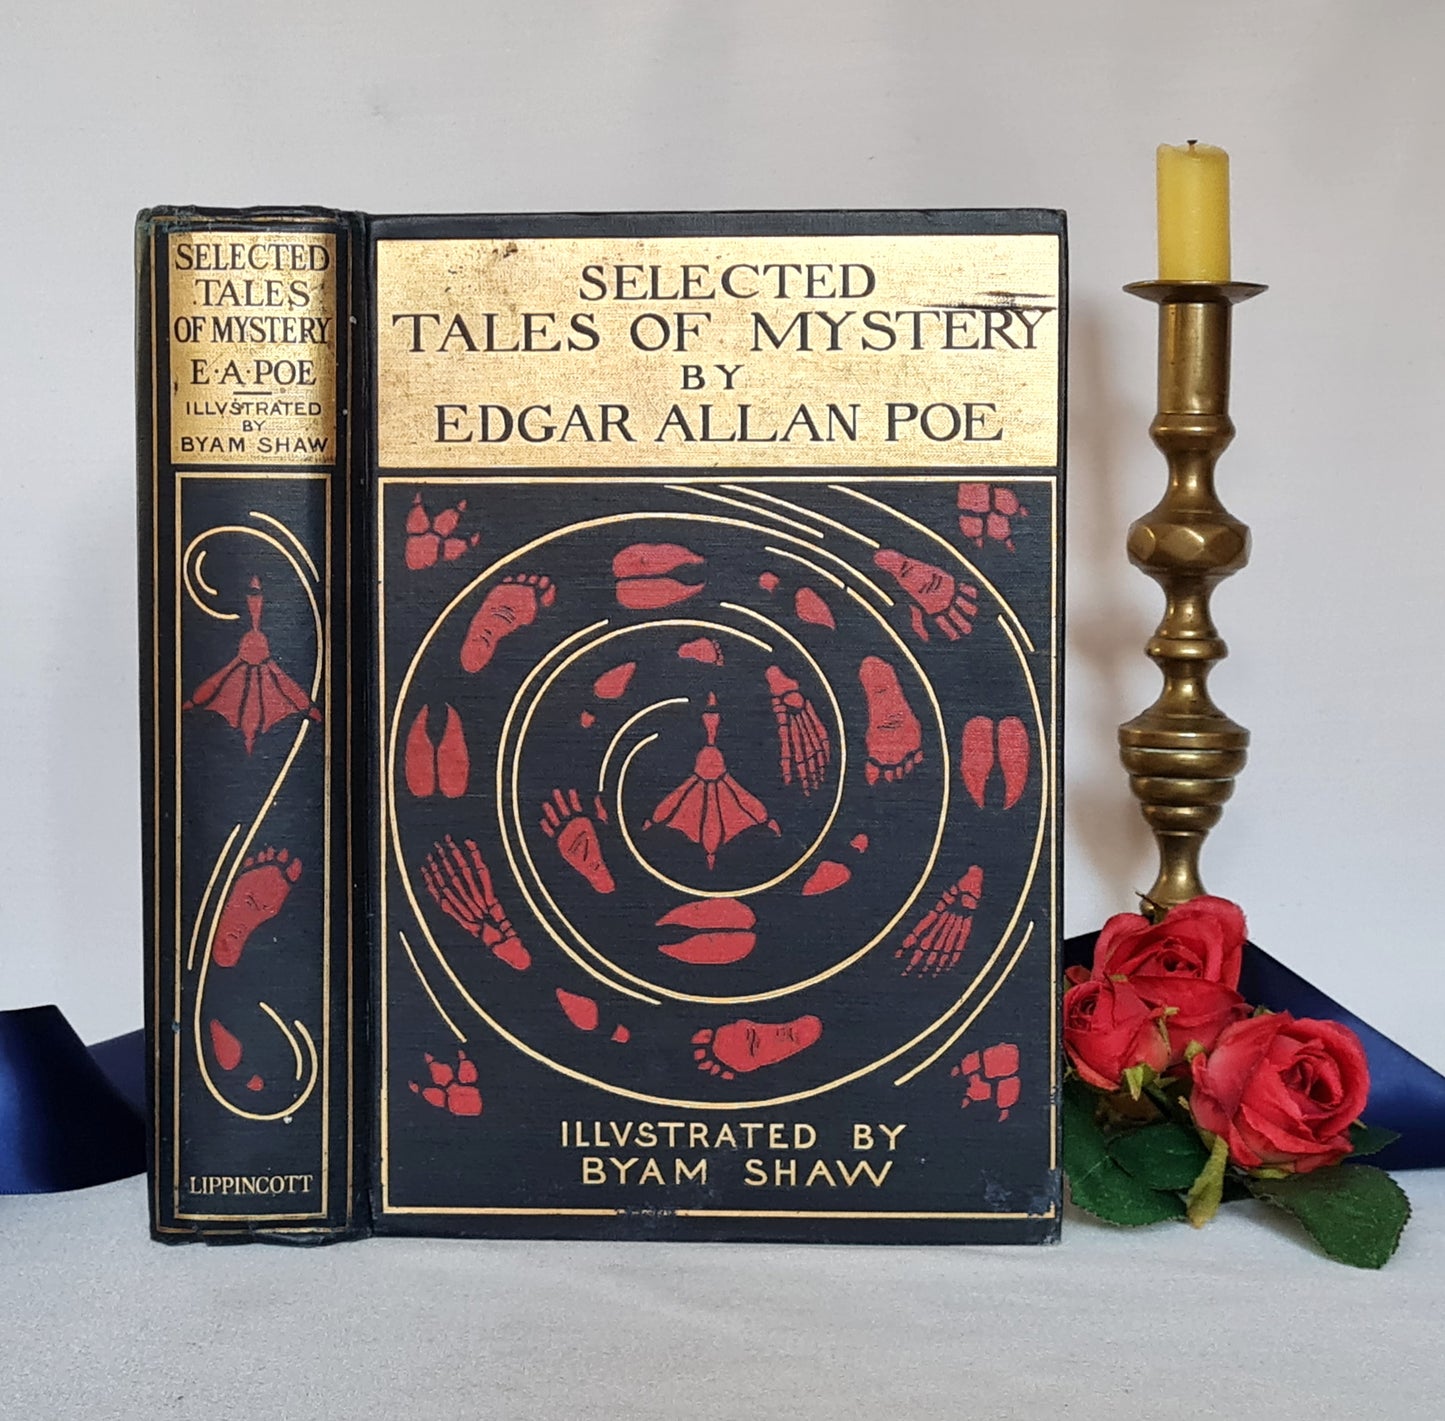 1909 Selected Tales of Mystery by Edgar Allan Poe / J B Lippincott Company / 16 Illustrated Colour Plates by Byam Shaw / WITH SOME WEAR